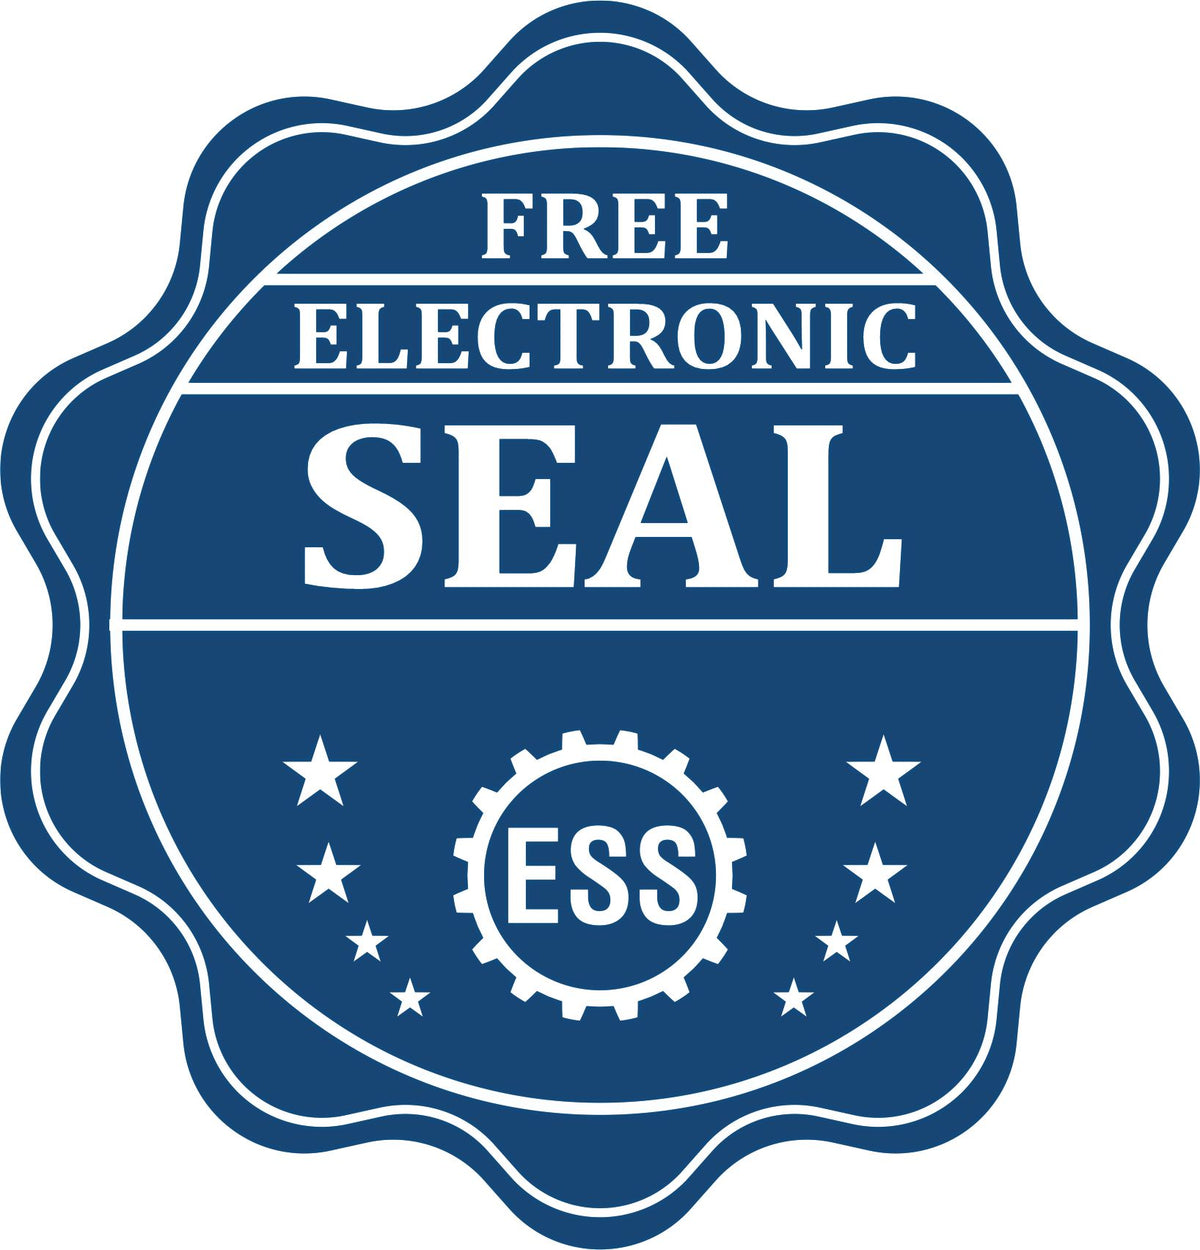 A badge showing a free electronic seal for the Gift Iowa Architect Seal with stars and the ESS gear on the emblem.